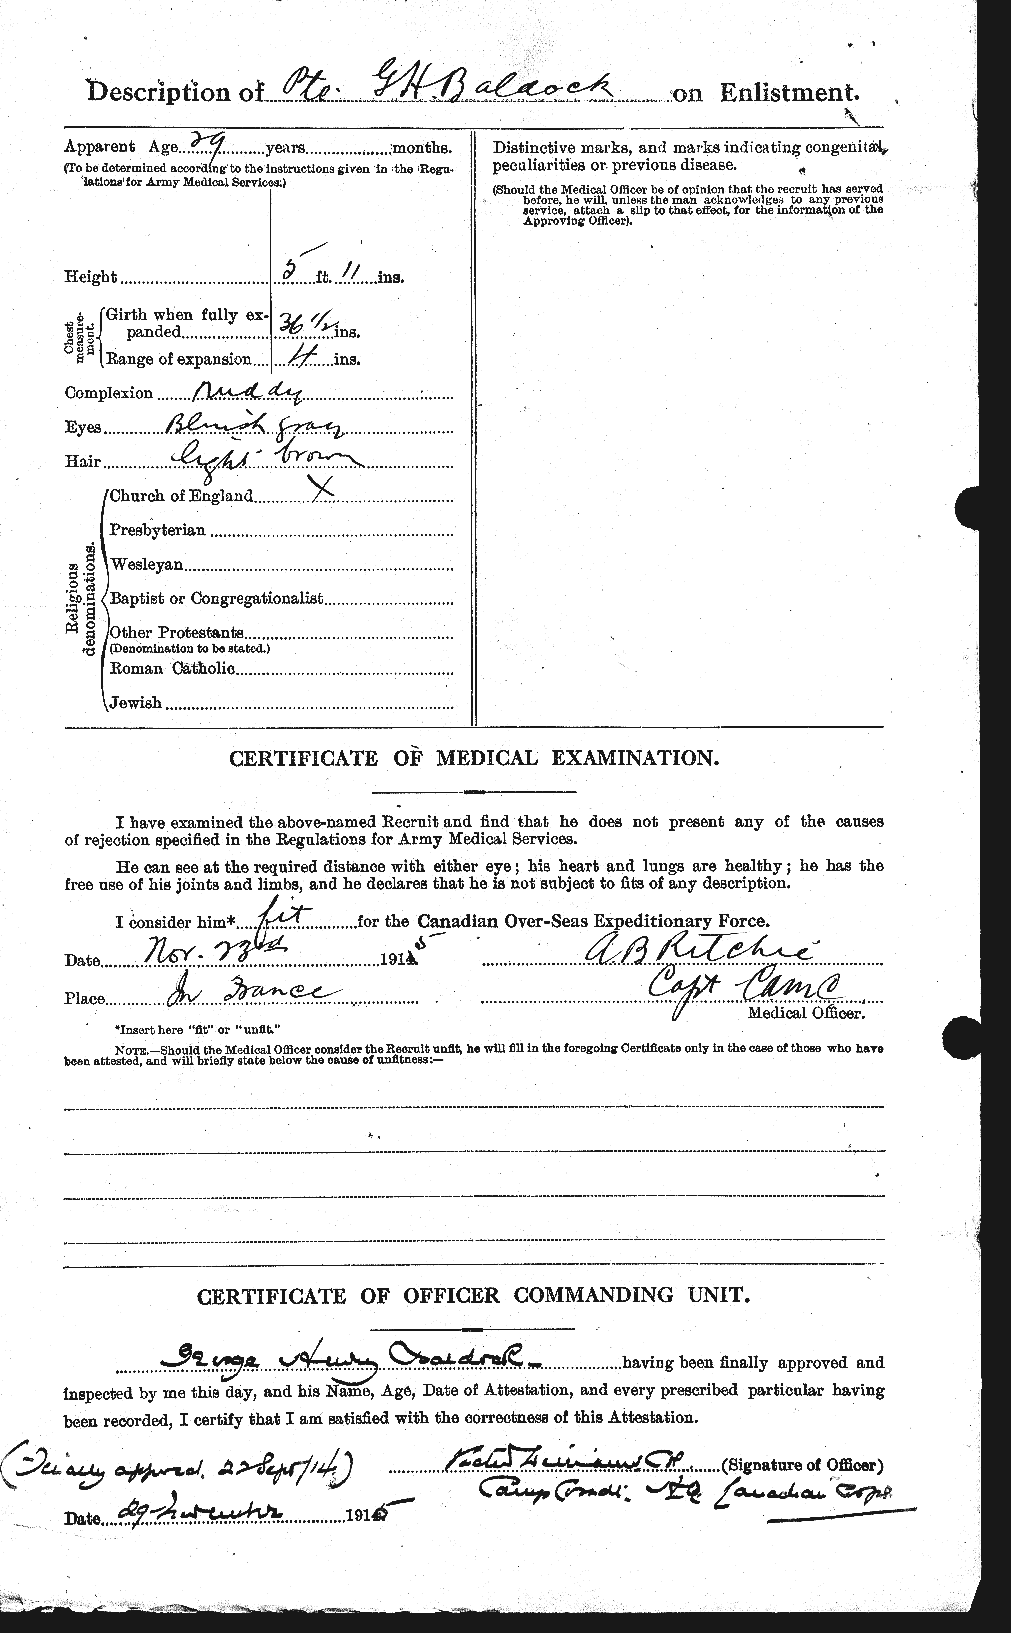 Personnel Records of the First World War - CEF 225374b